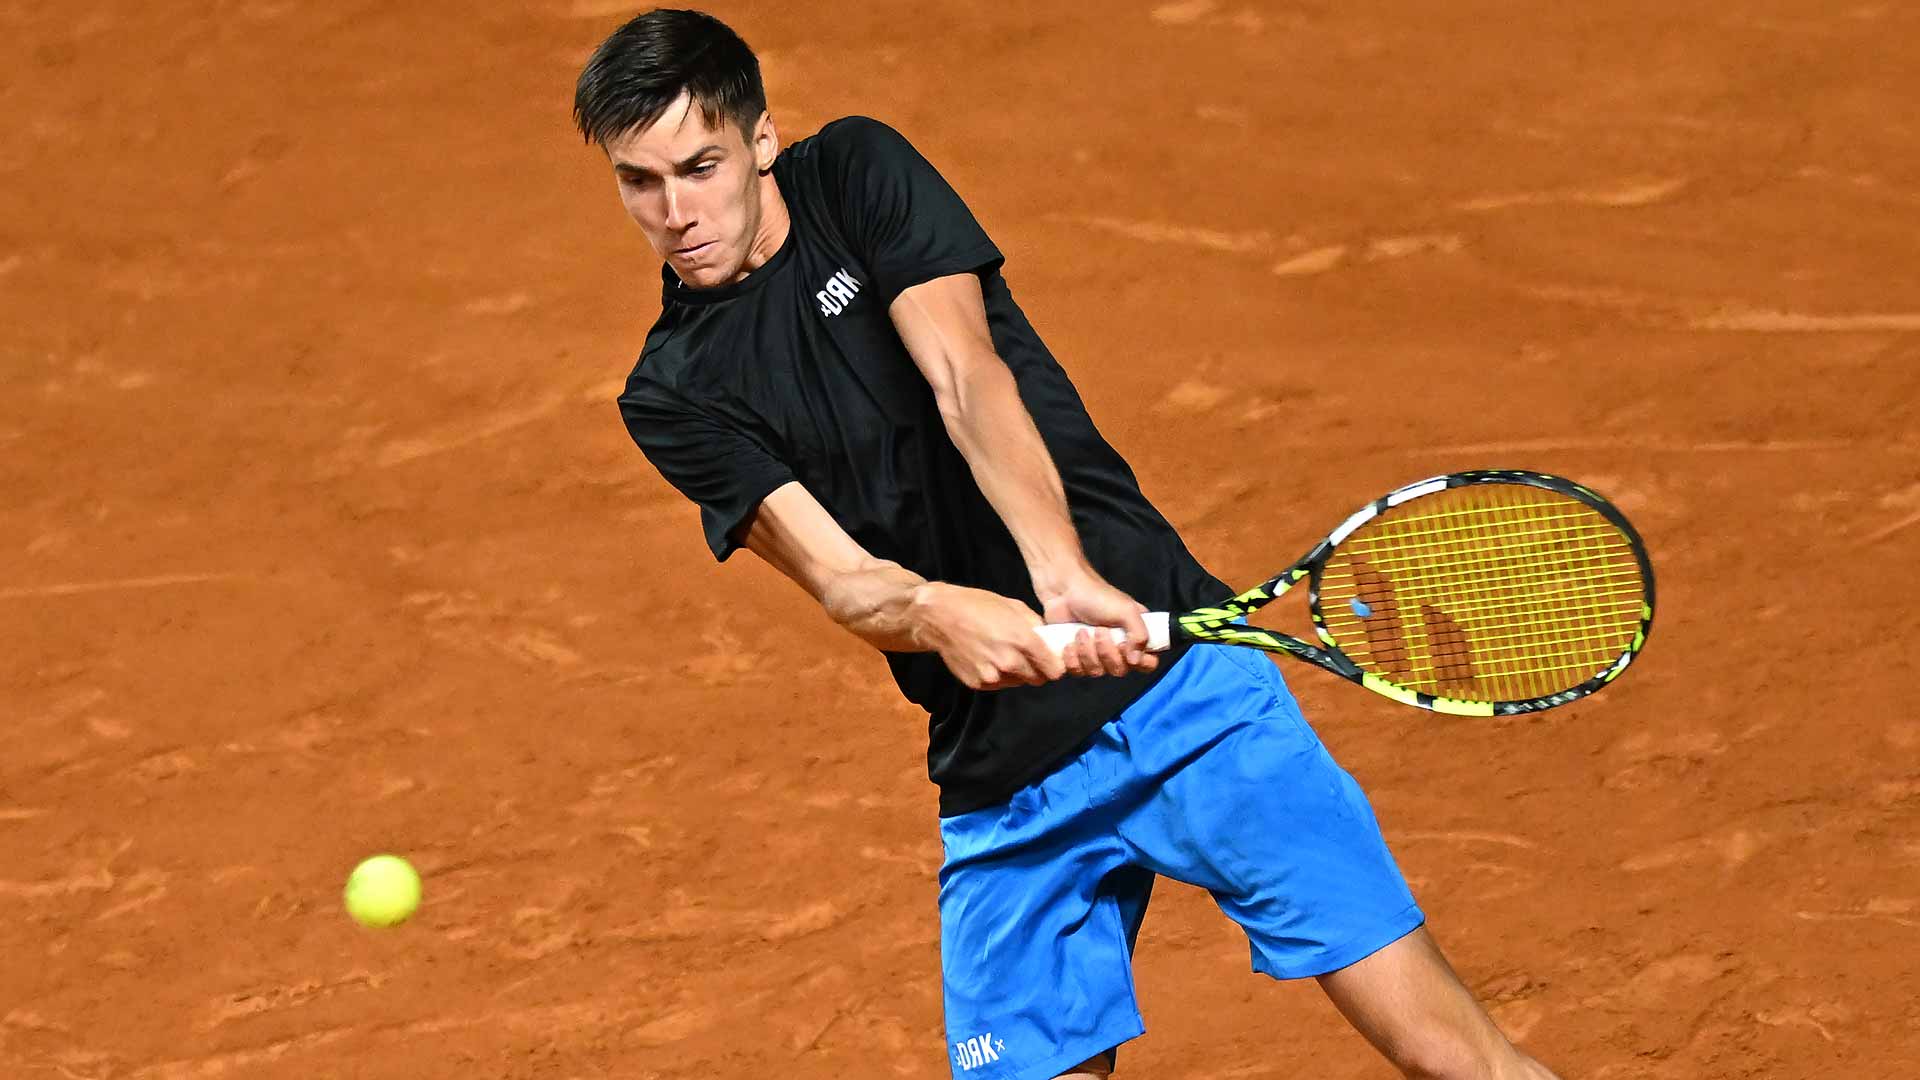 Fabian Marozsan, who upset Carlos Alcaraz in Rome, is competing in Roland Garros qualifying for the first time.